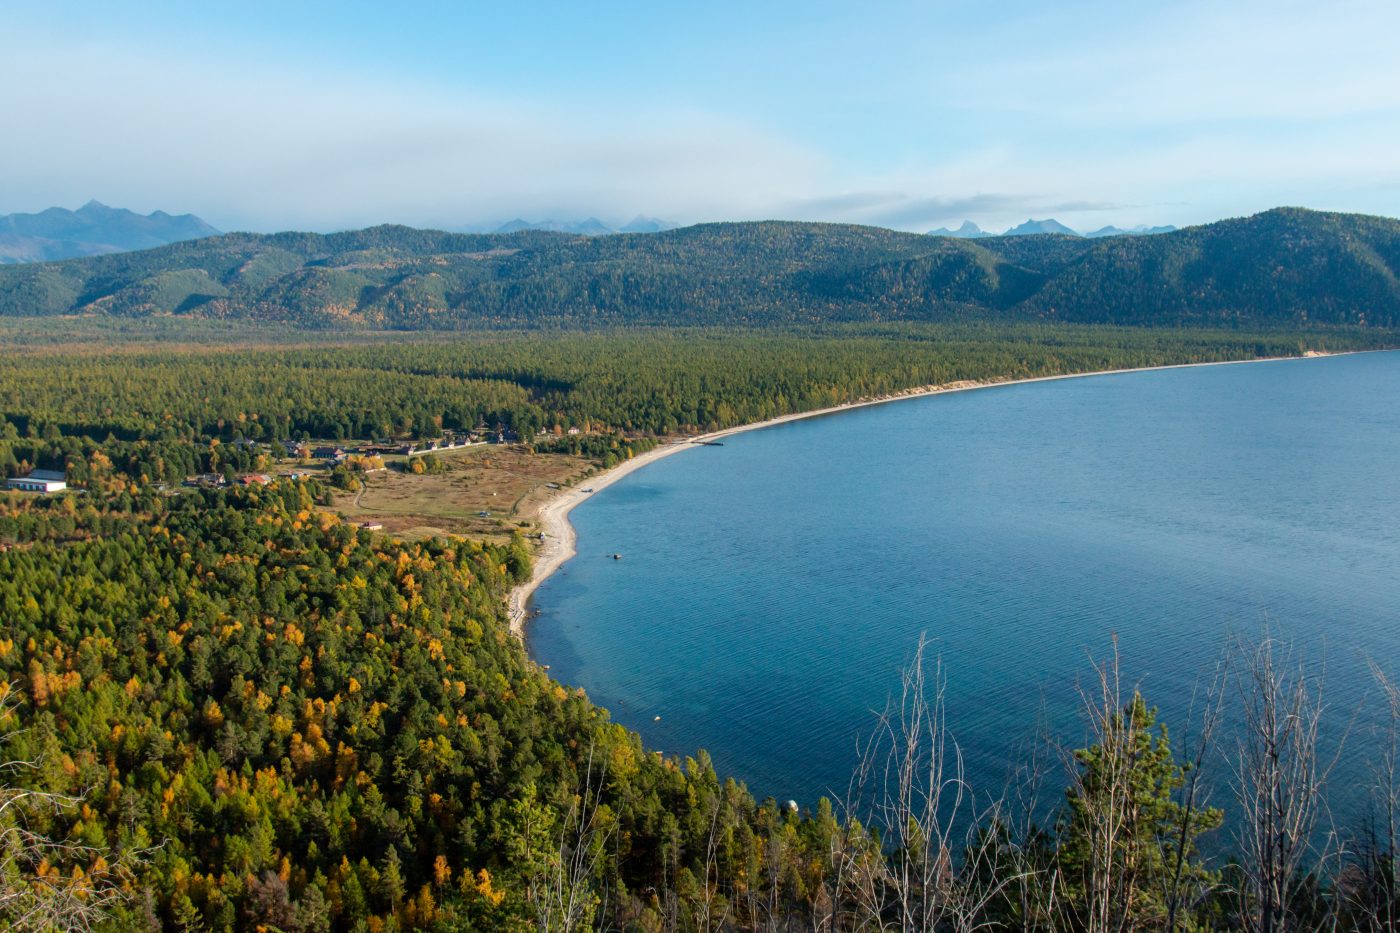 The Baikal: Protecting and Preserving